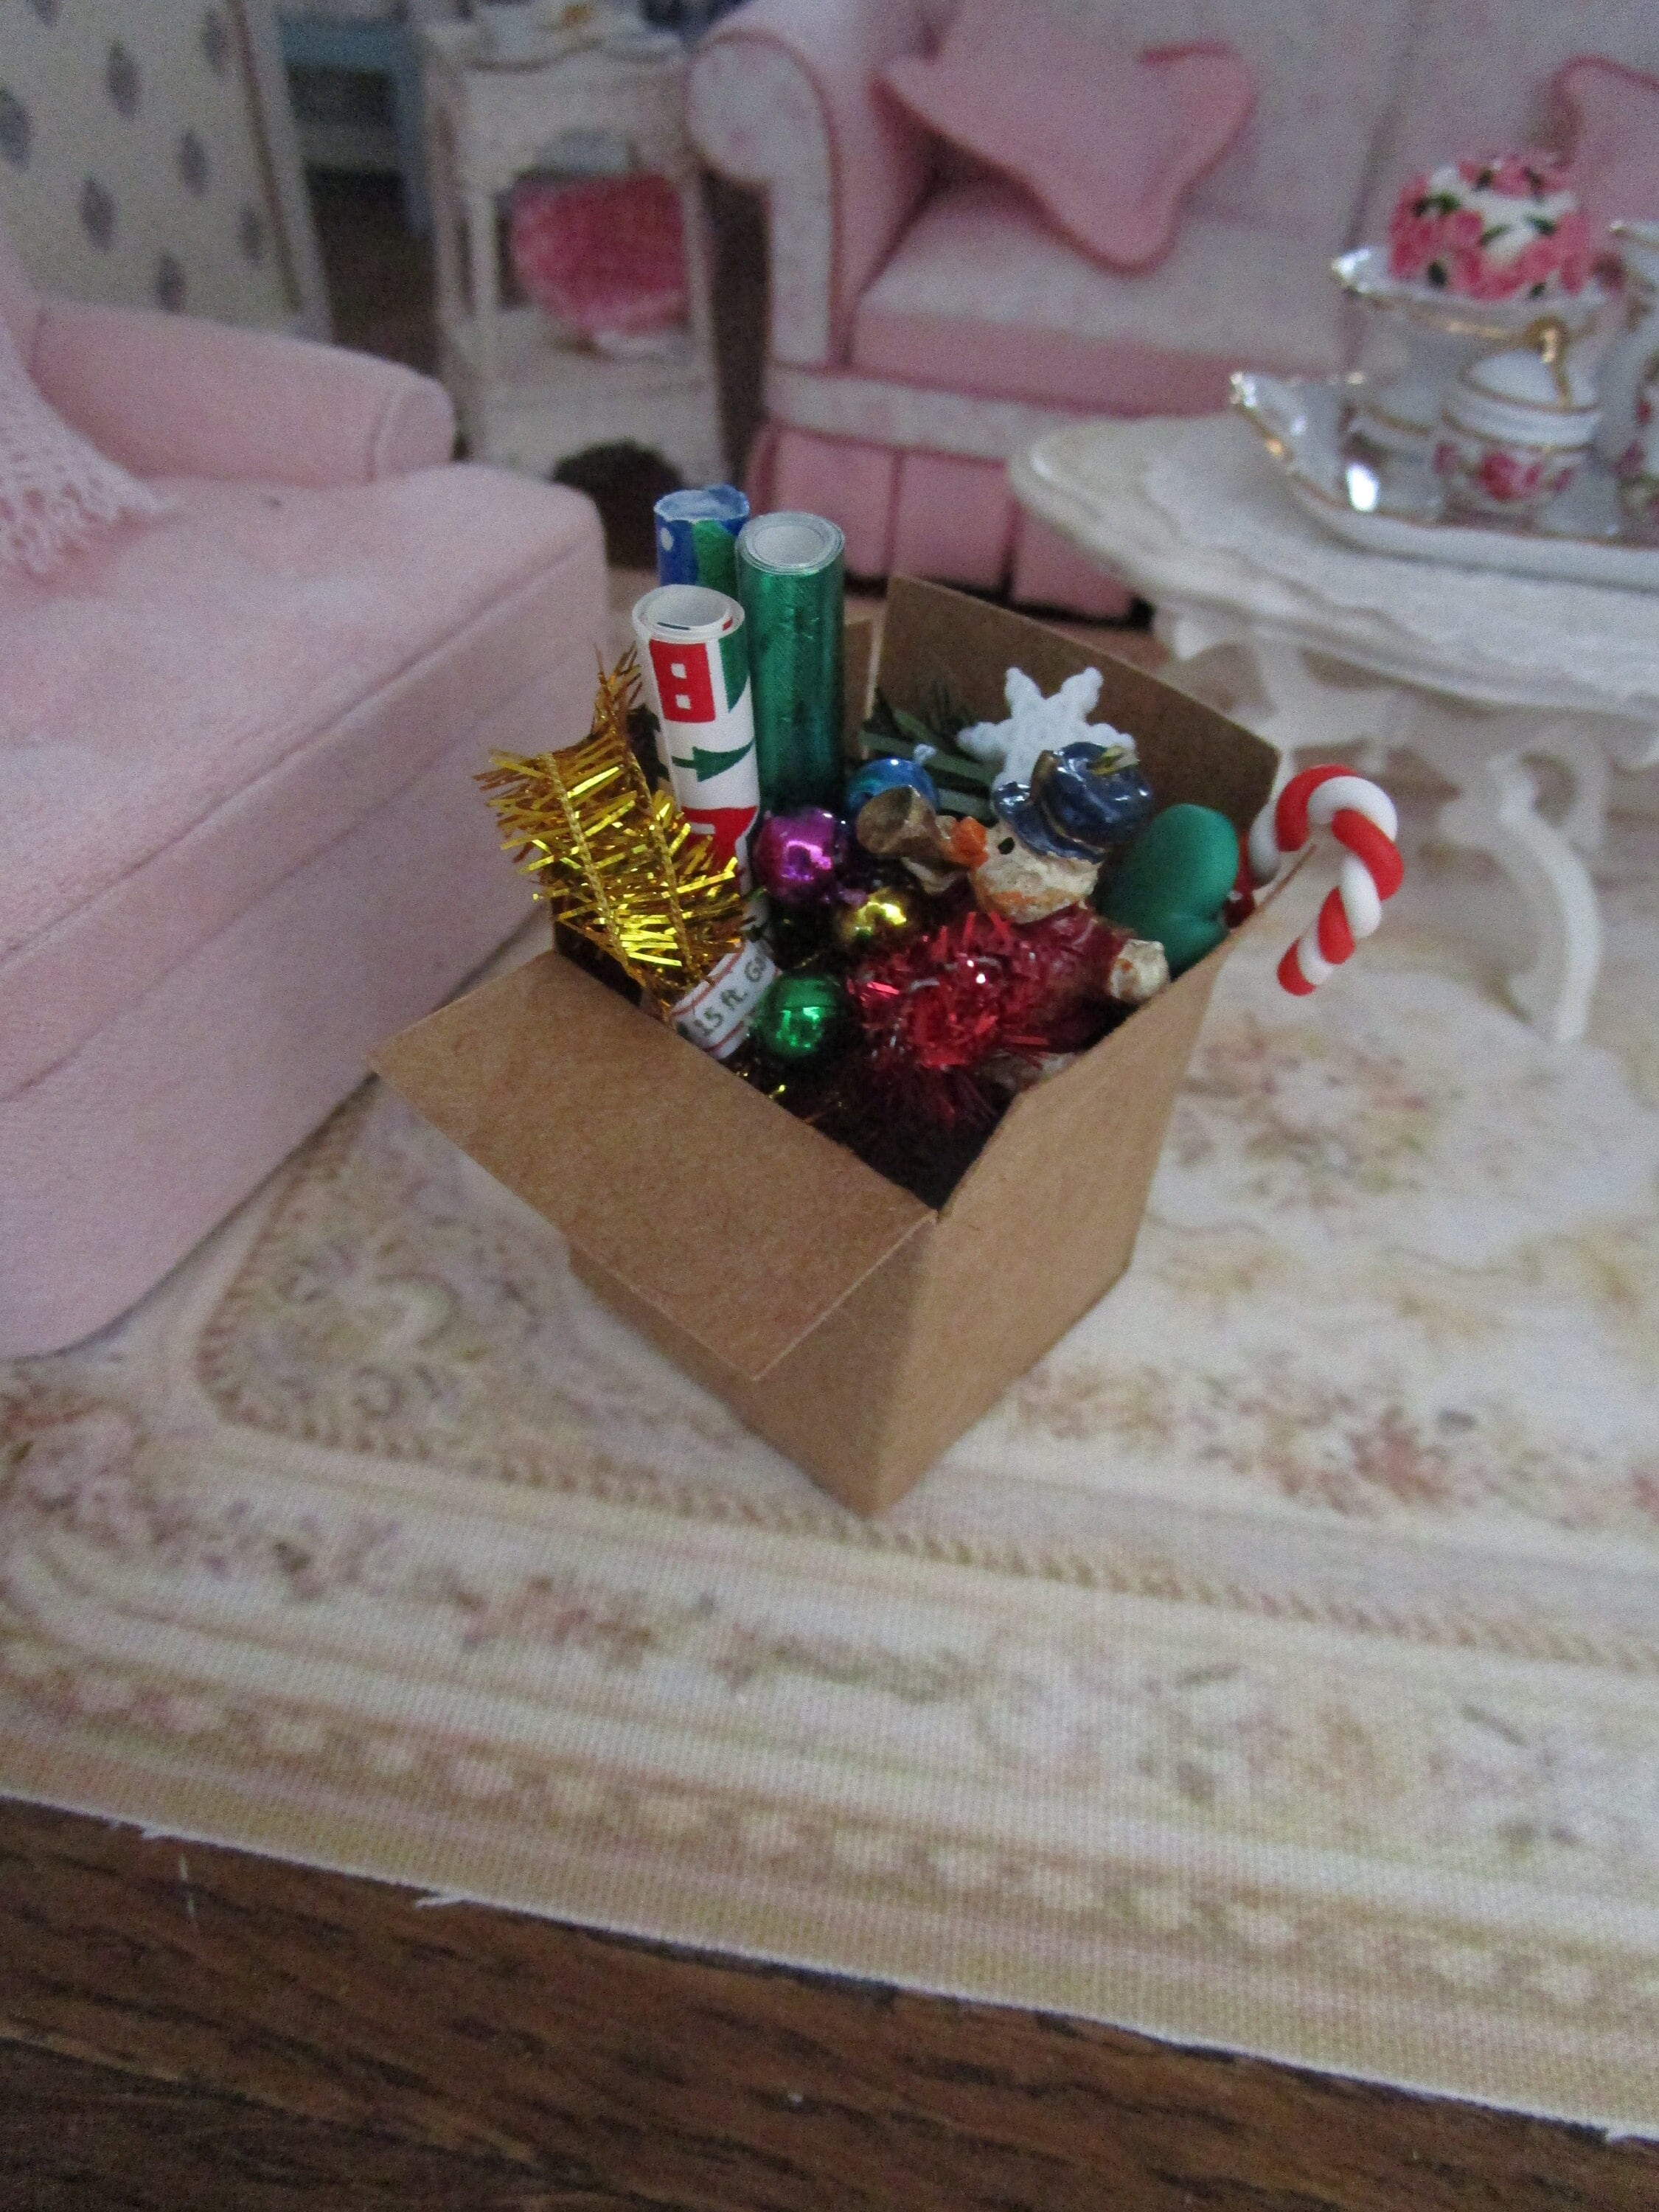 1:12 - 1 Scale Dollhouse Miniature Christmas Decorations in Box